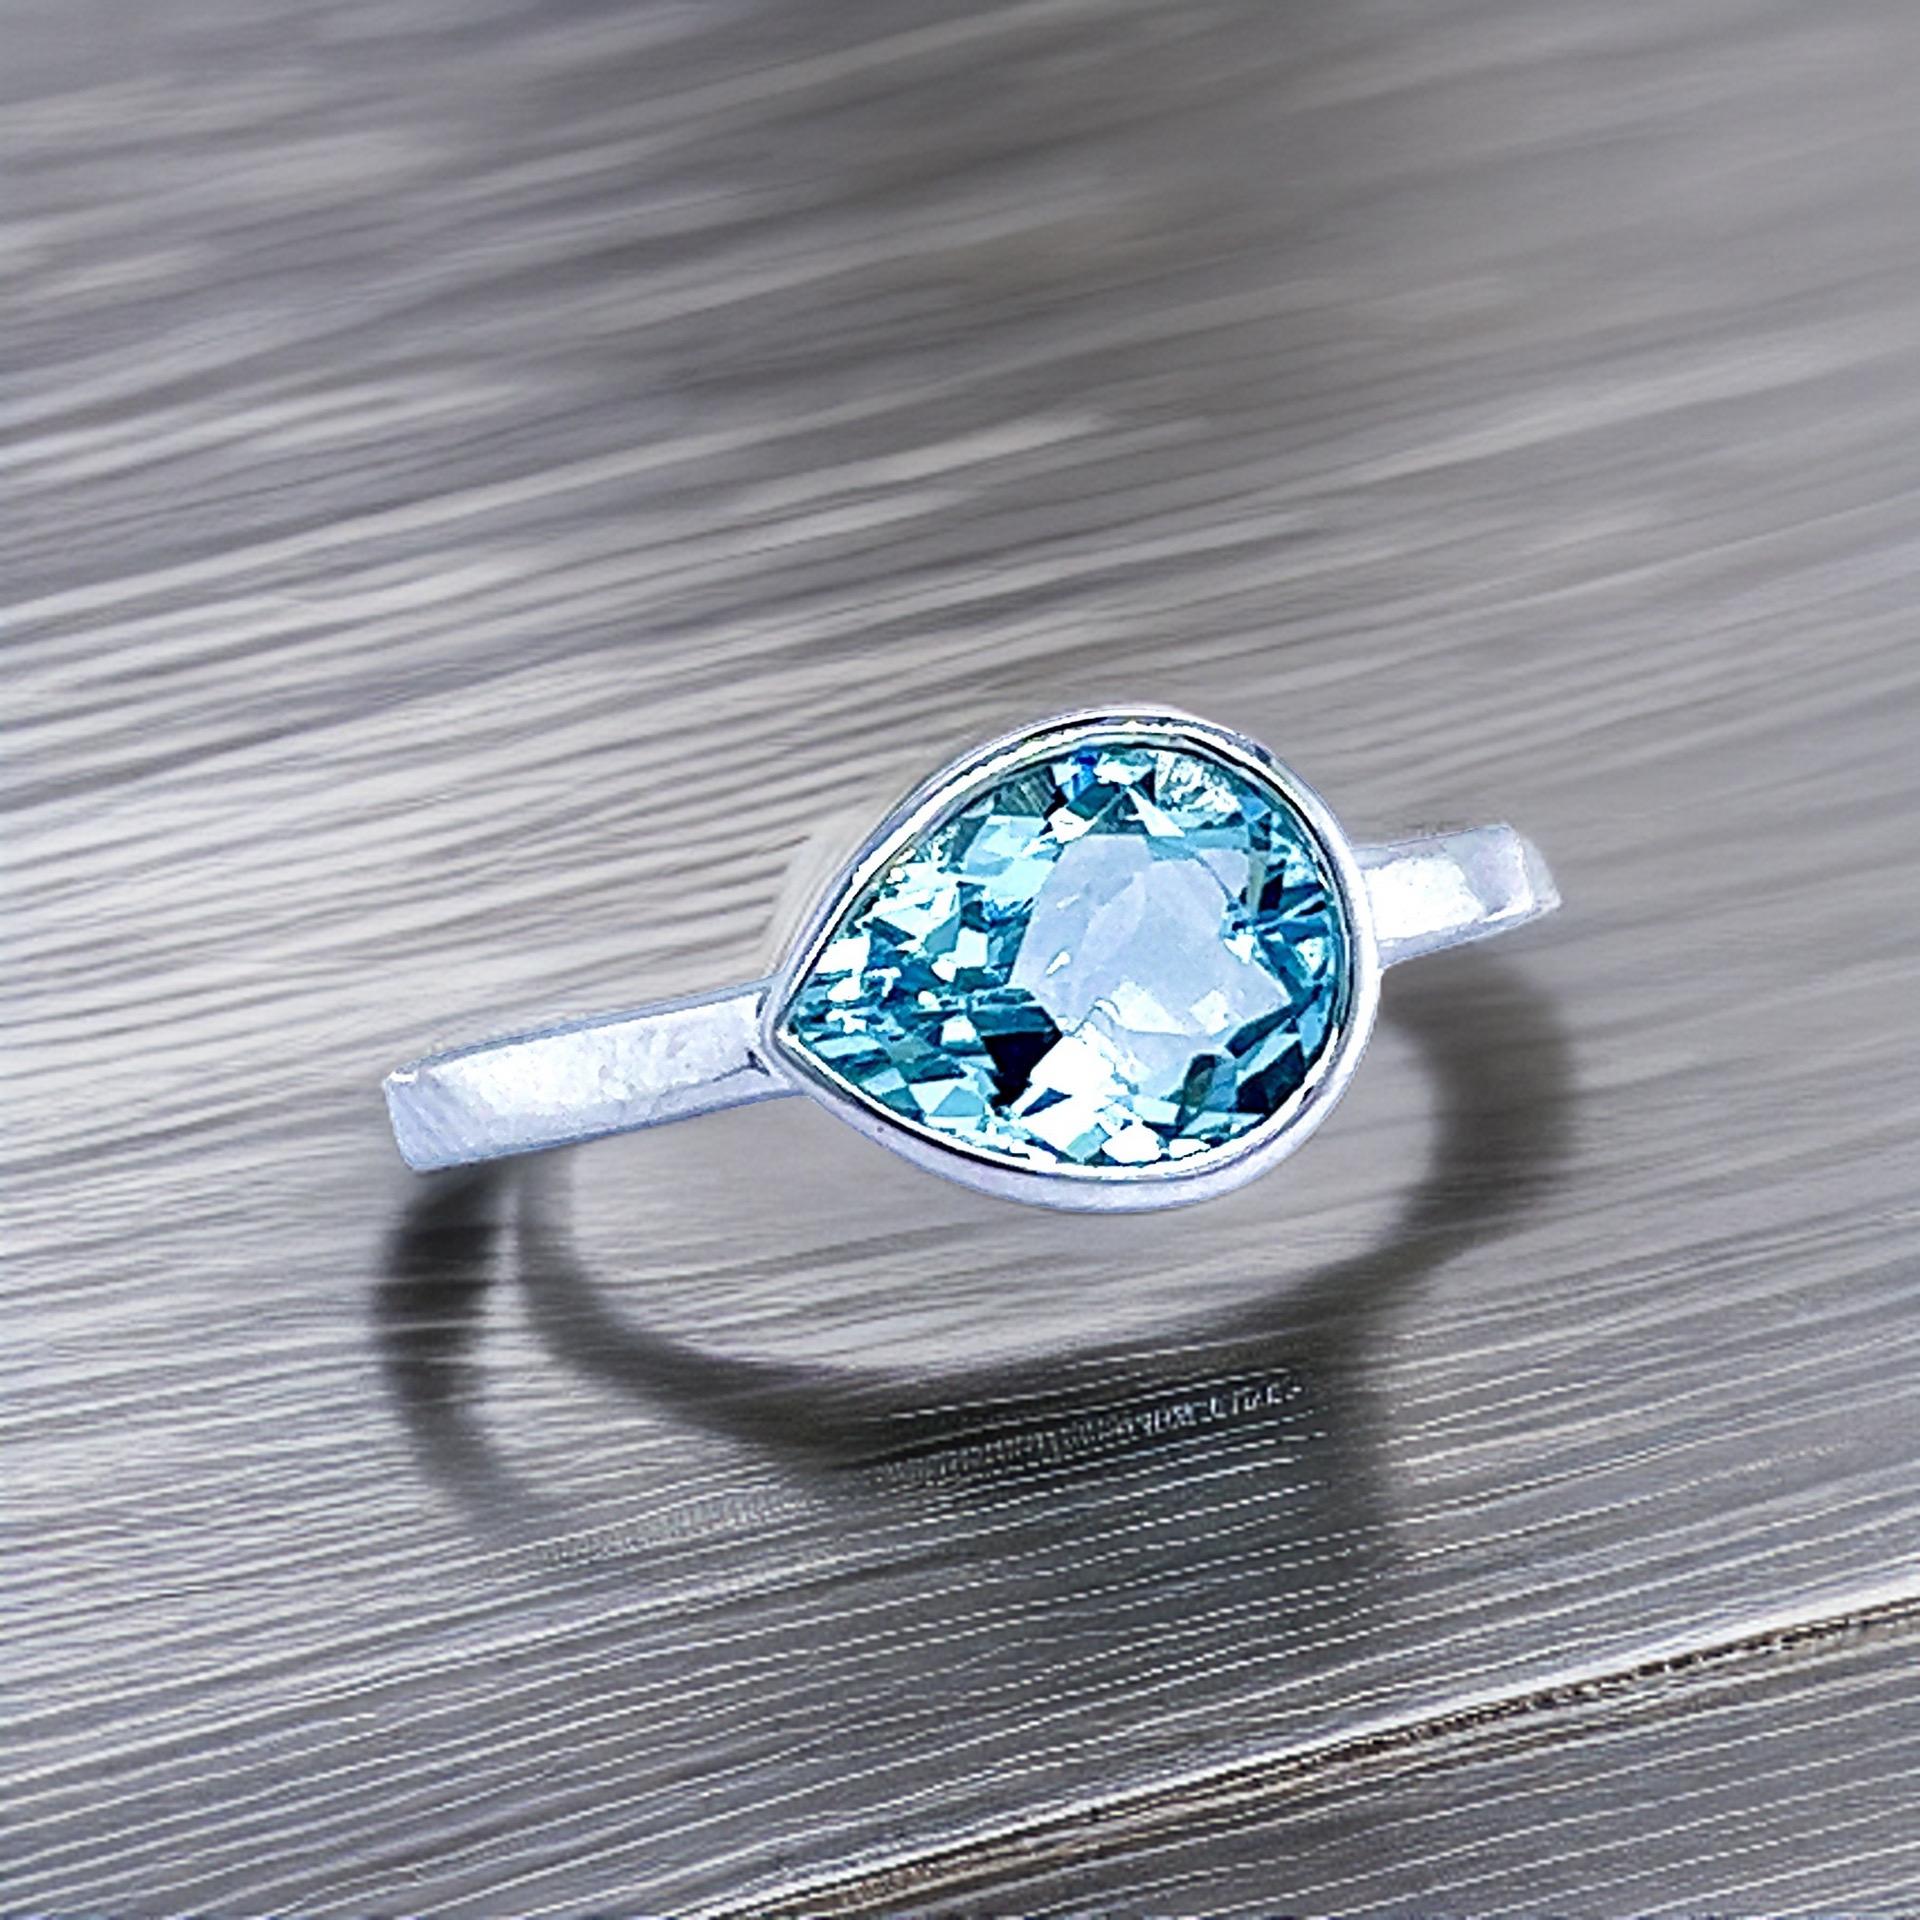 Natural Aquamarine Ring 6.5 14k W Gold 1.37 TCW Certified For Sale 2